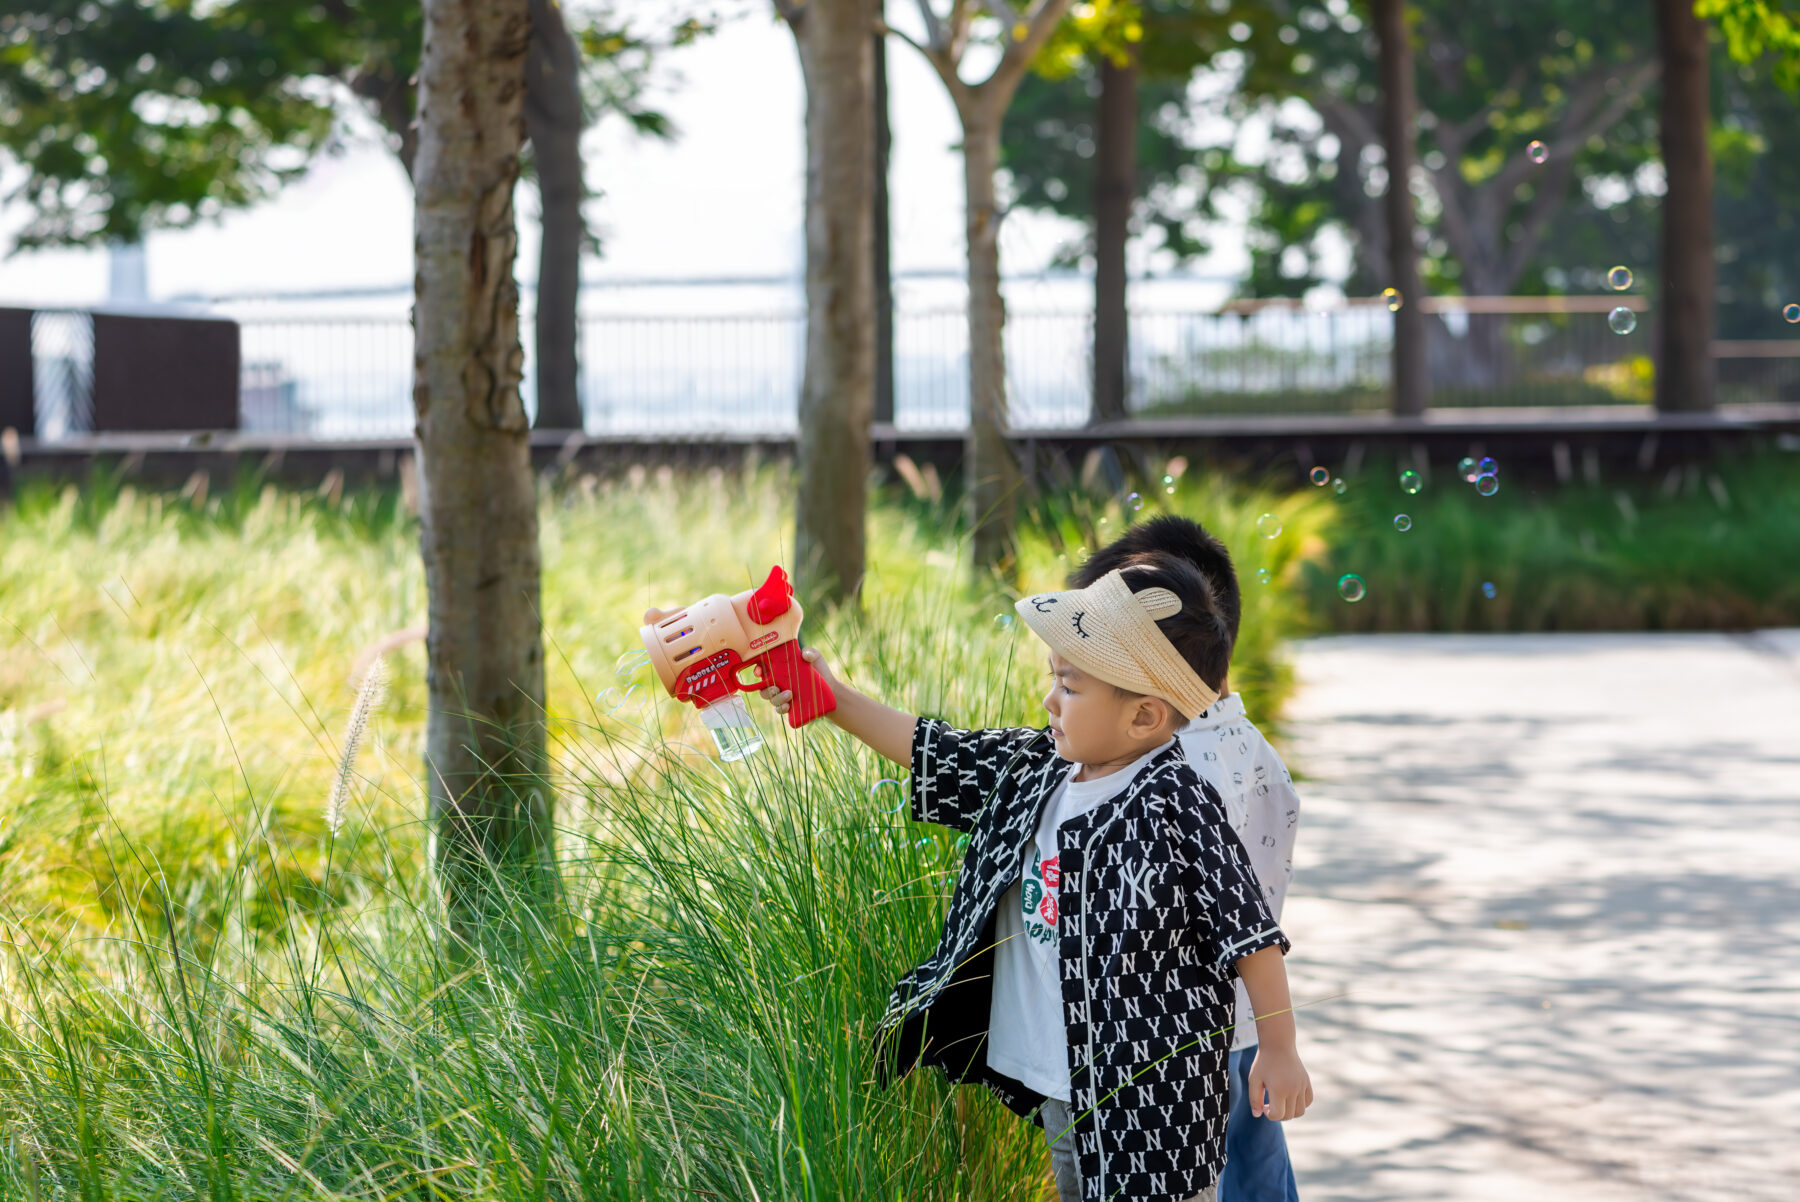 photography of small children playing with bubbles along the tree-lined pathway with tall grass